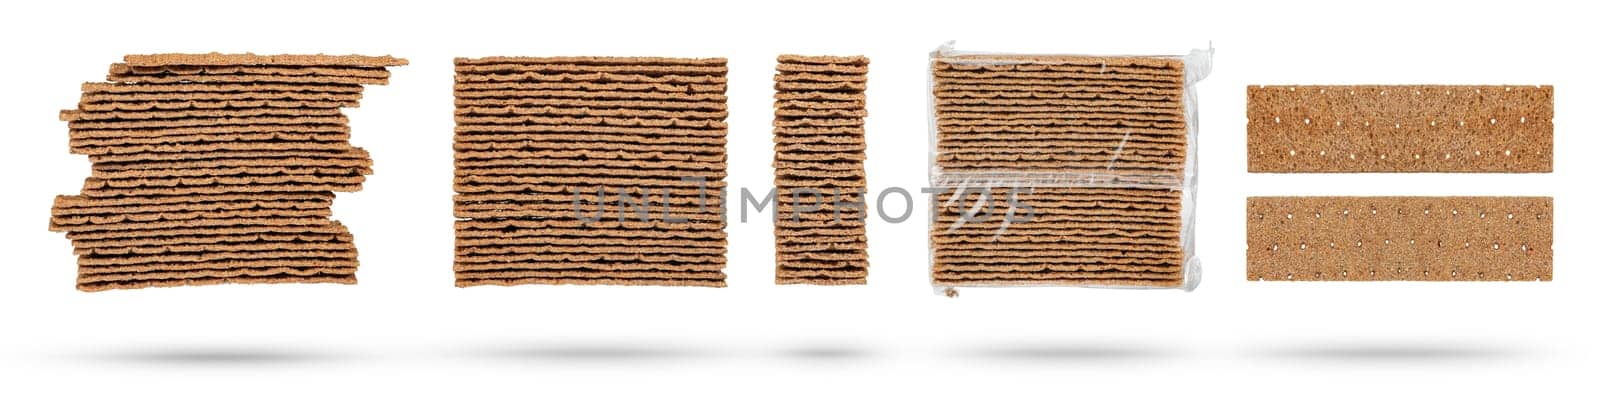 Set of different rye chips on a white background. The chips are stacked one on top of the other, close-up side view. A set of dried bread slices for sandwiches. by SERSOL